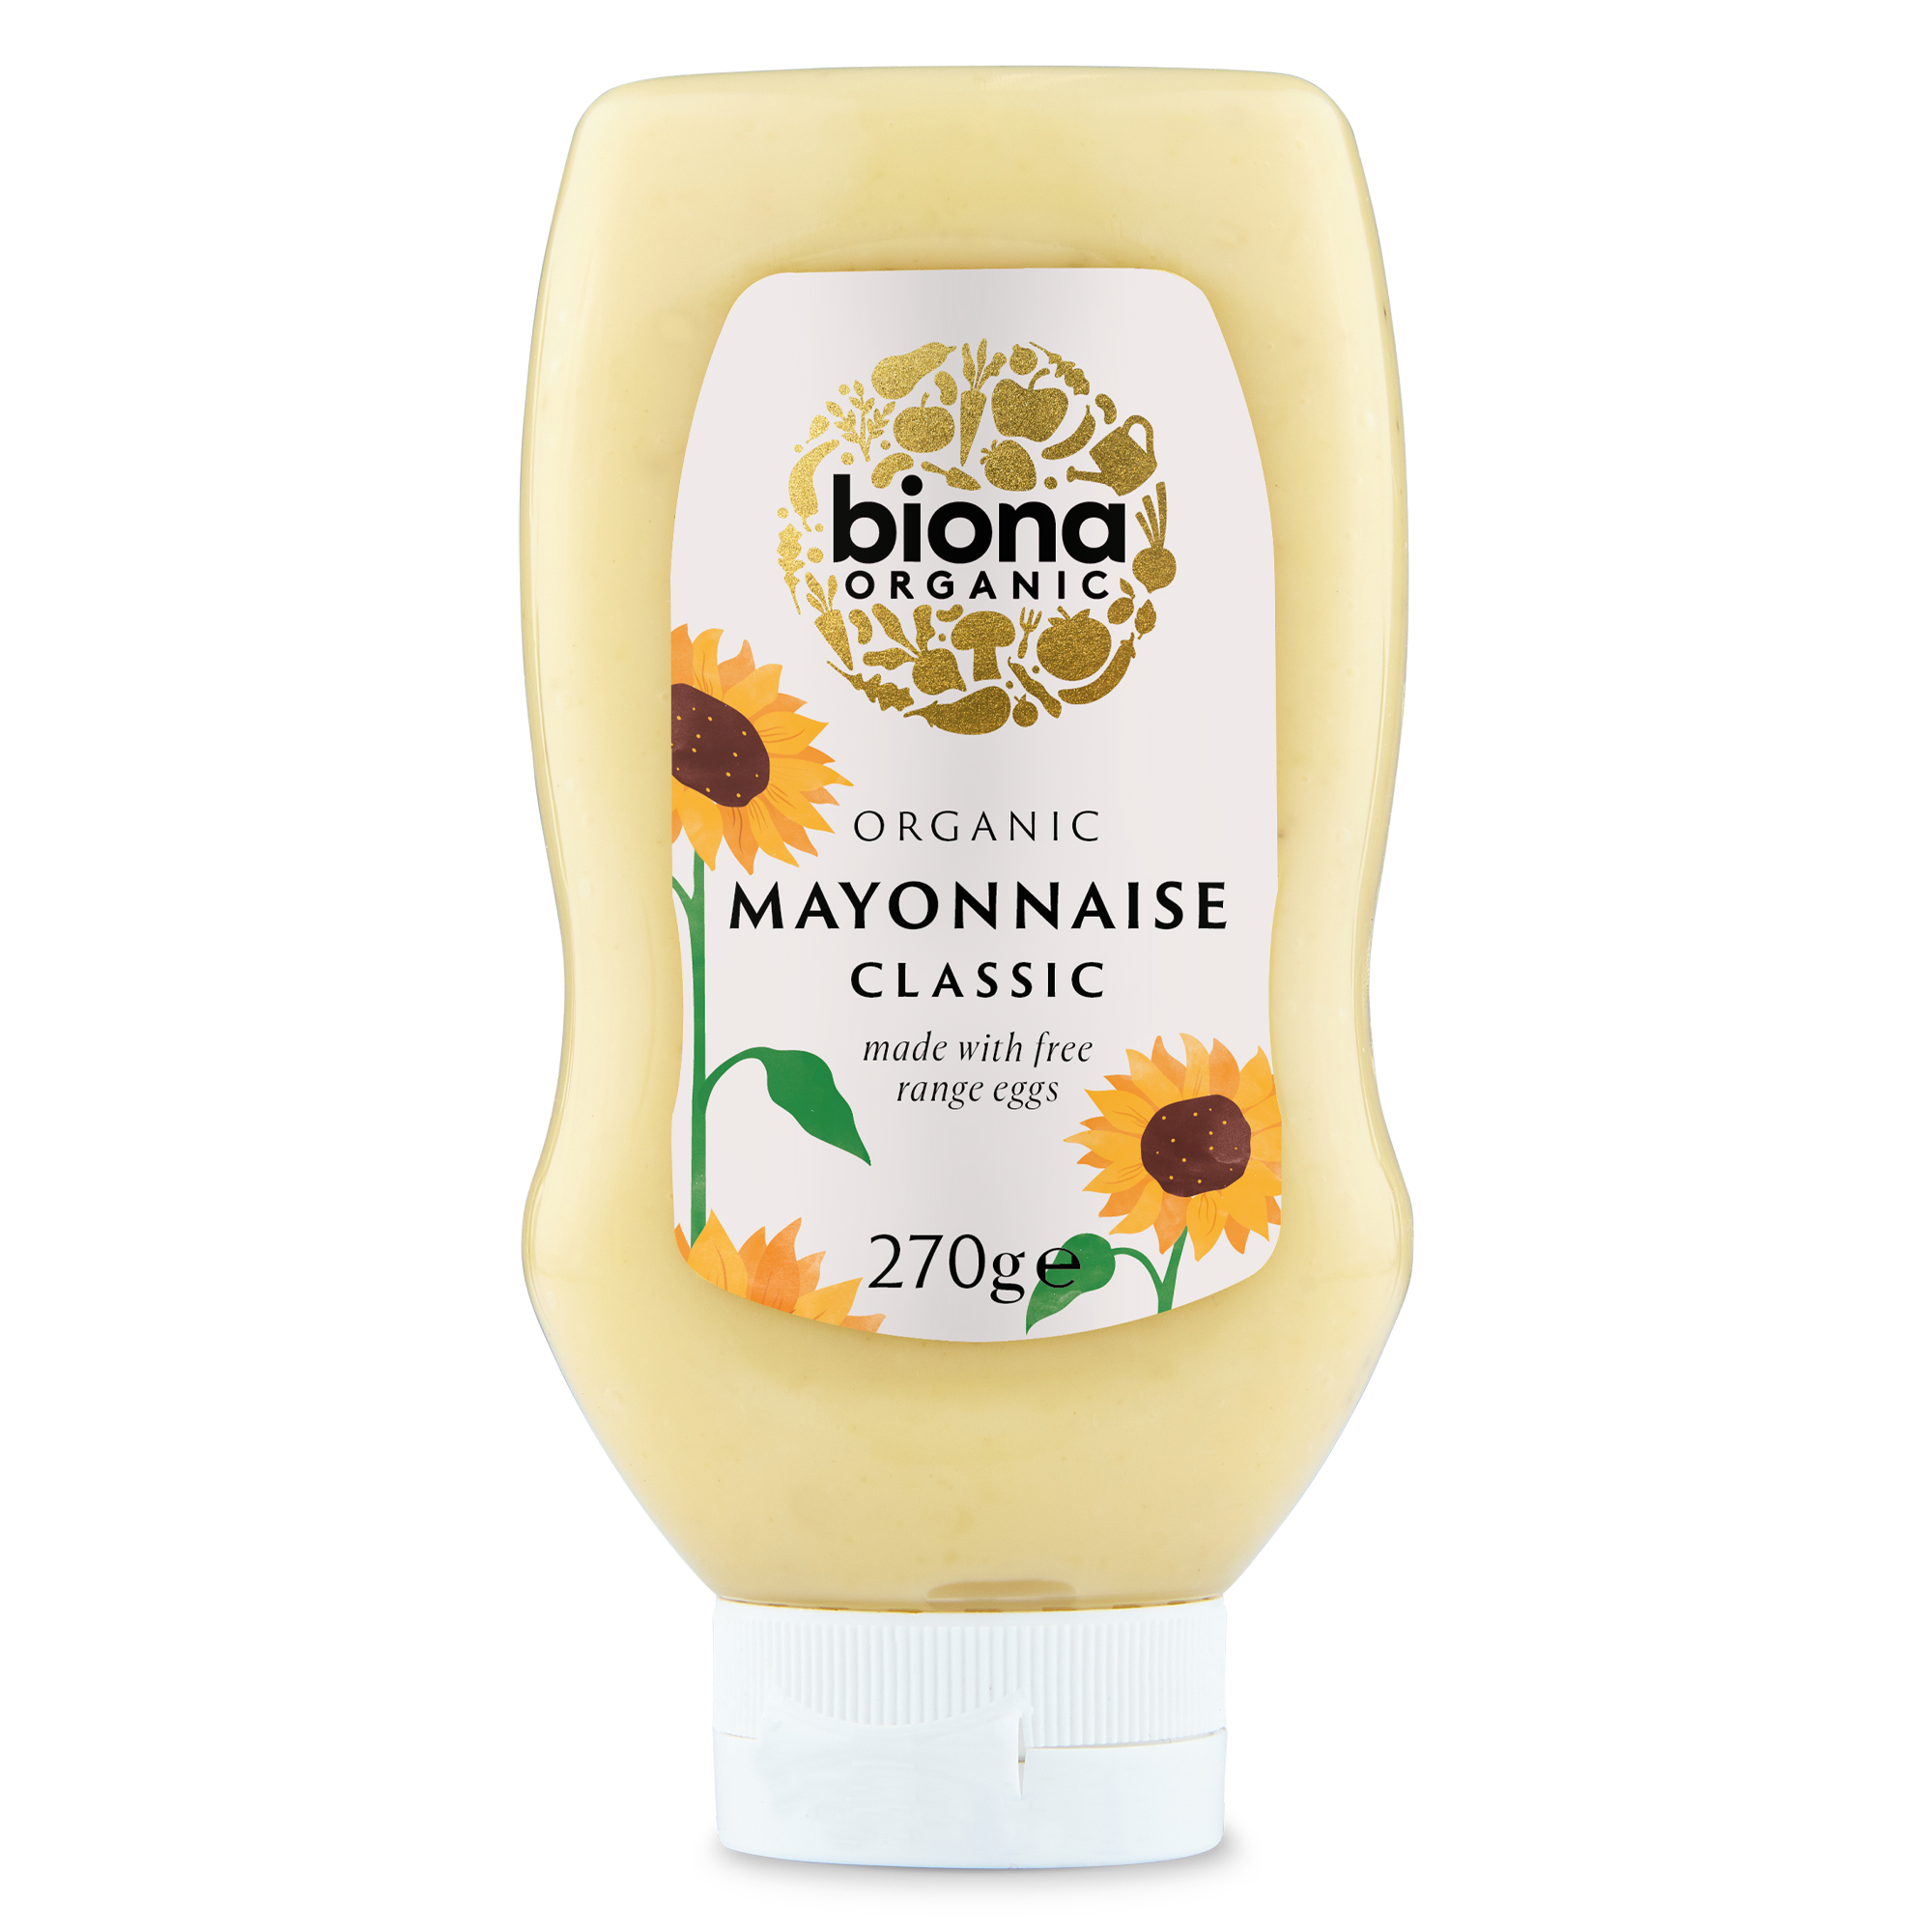 ORIGINAL MAYONNAISE - SQUEEZY